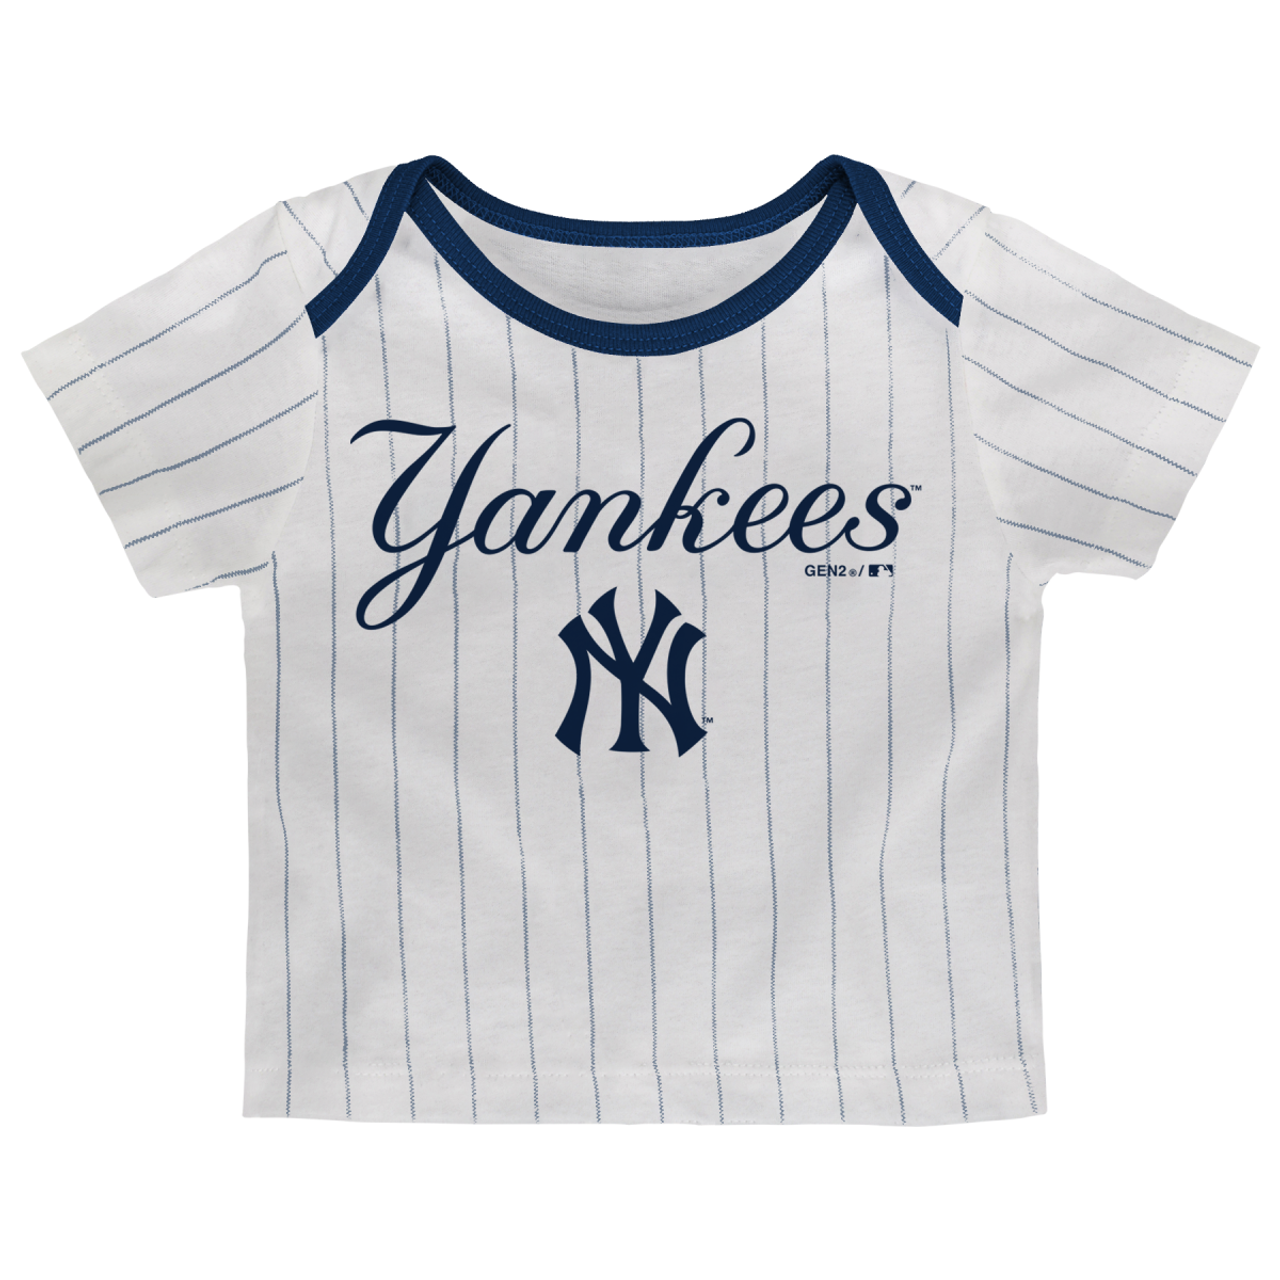 What's it like to NOT put on pinstripes? Not every Yankee is